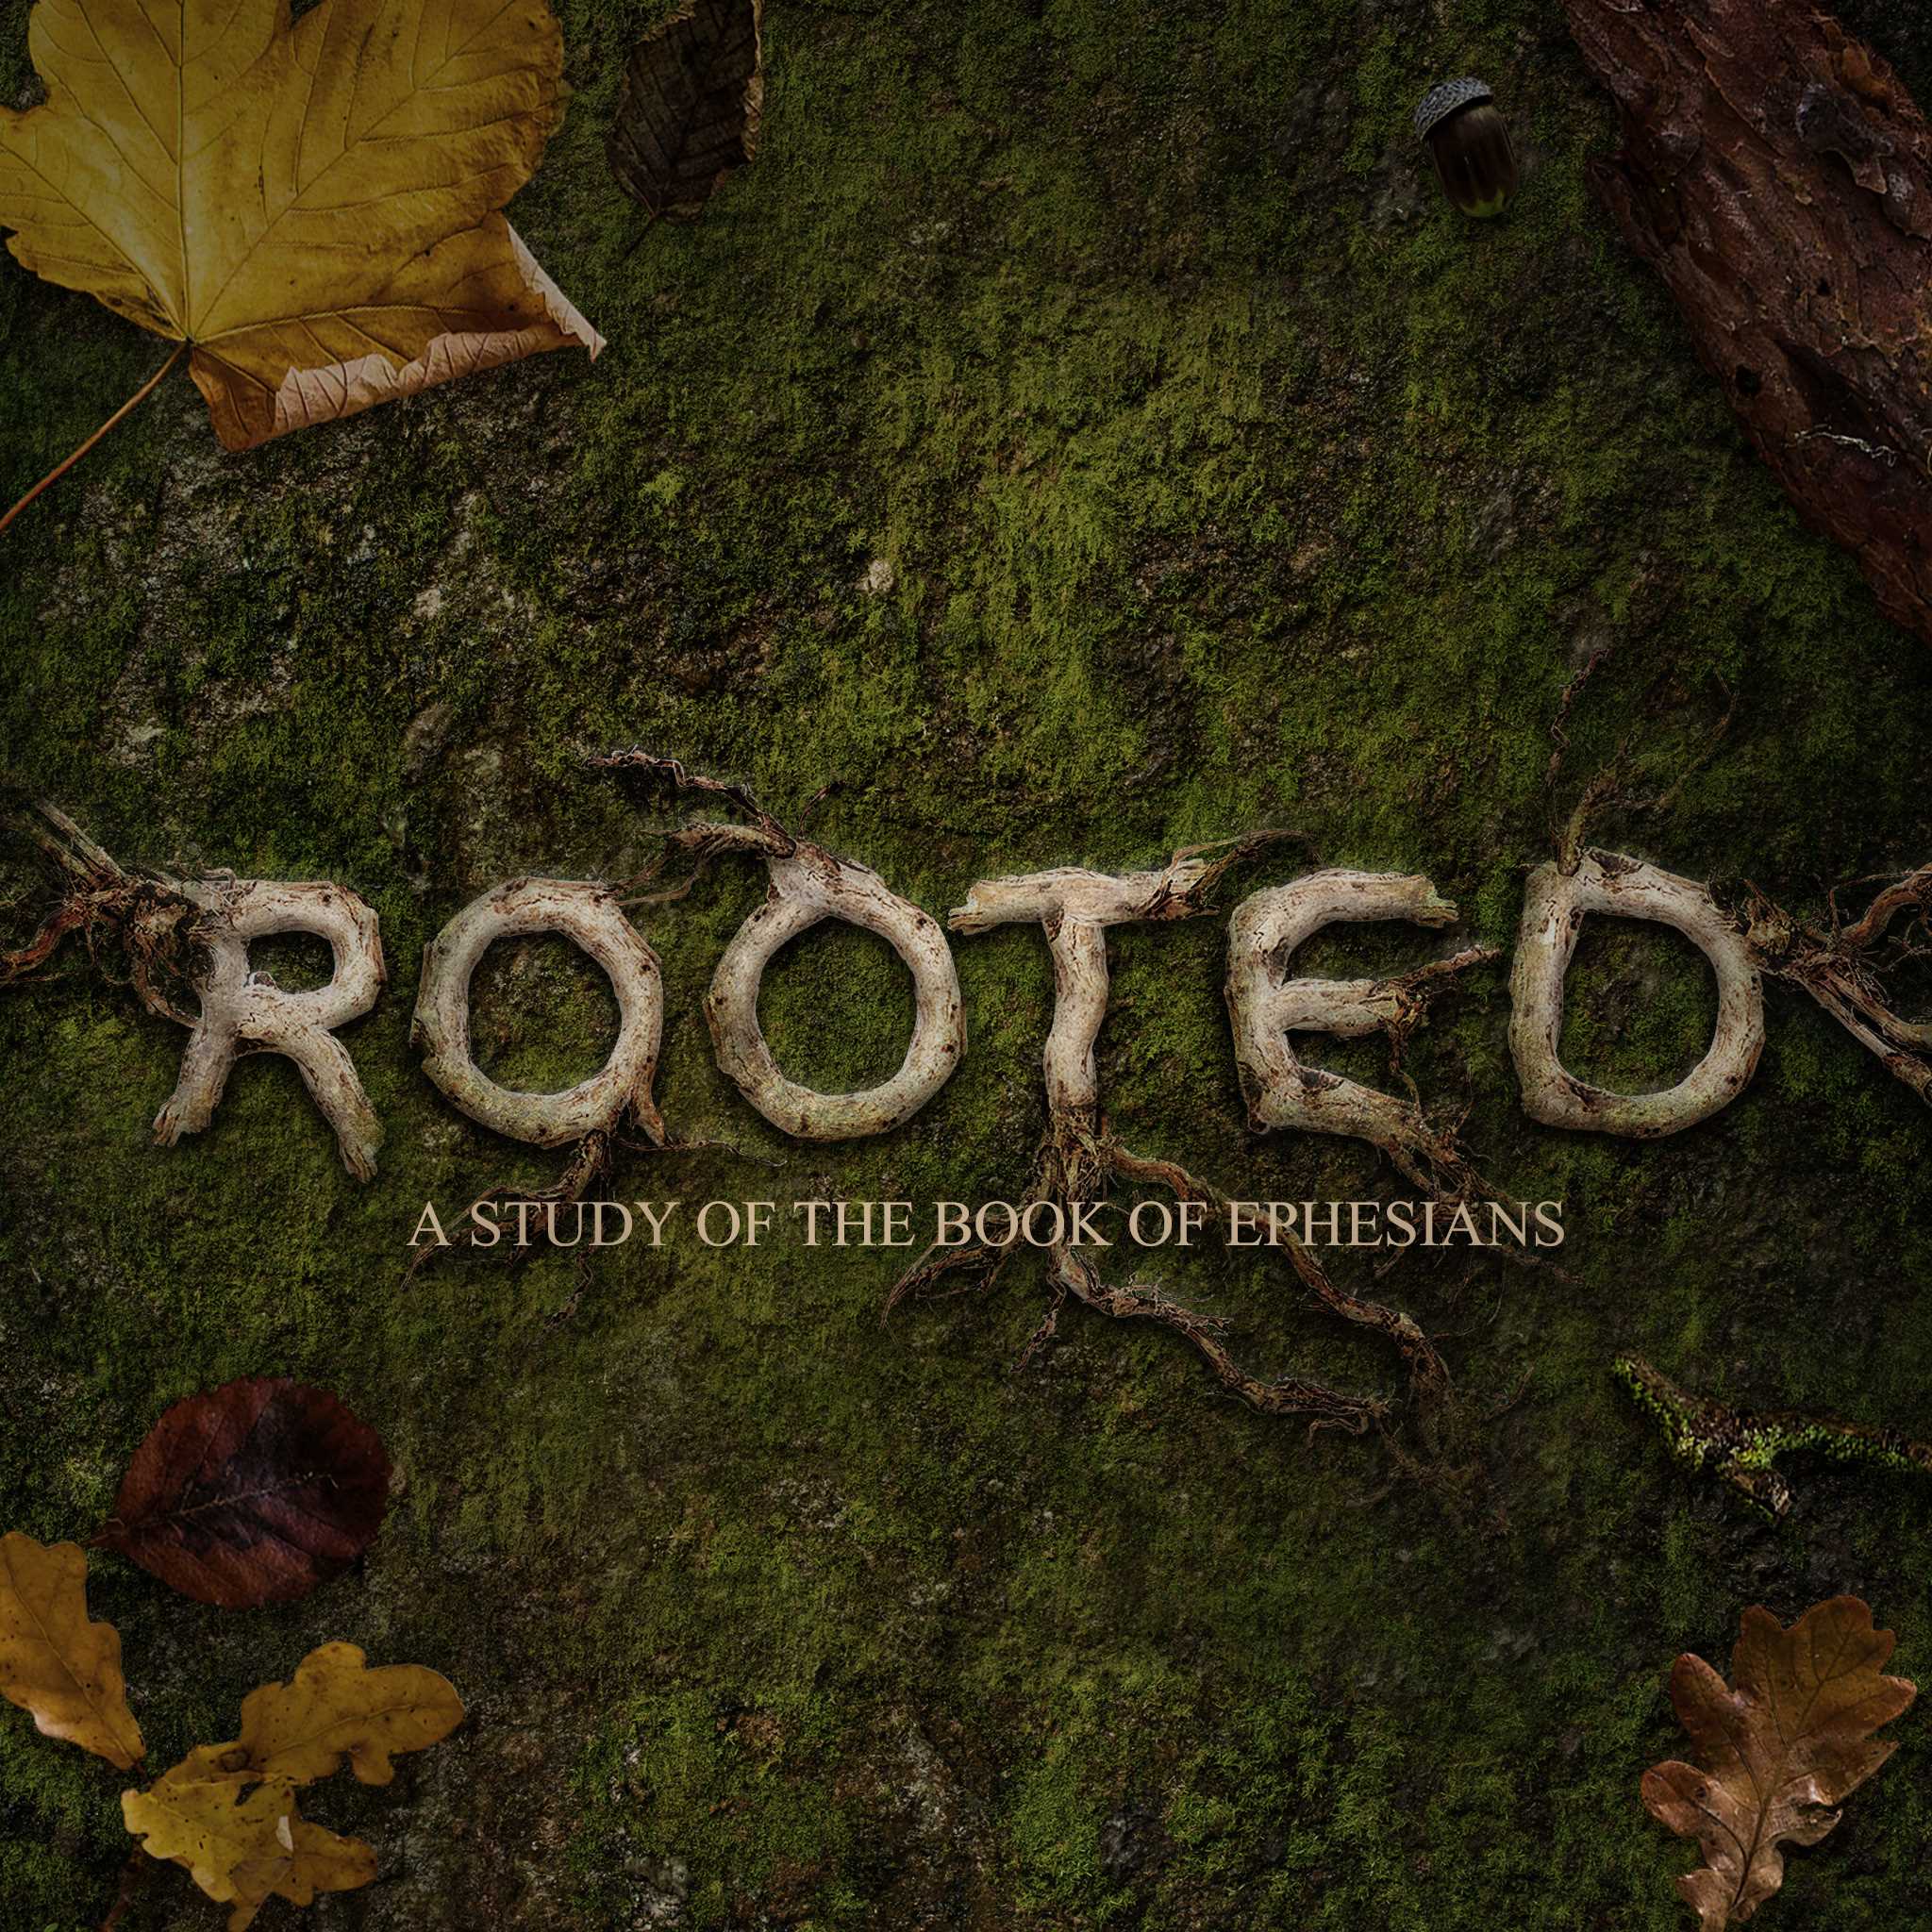 Rooted - A Study of the Book of Ephesians - Intro To Ephesians